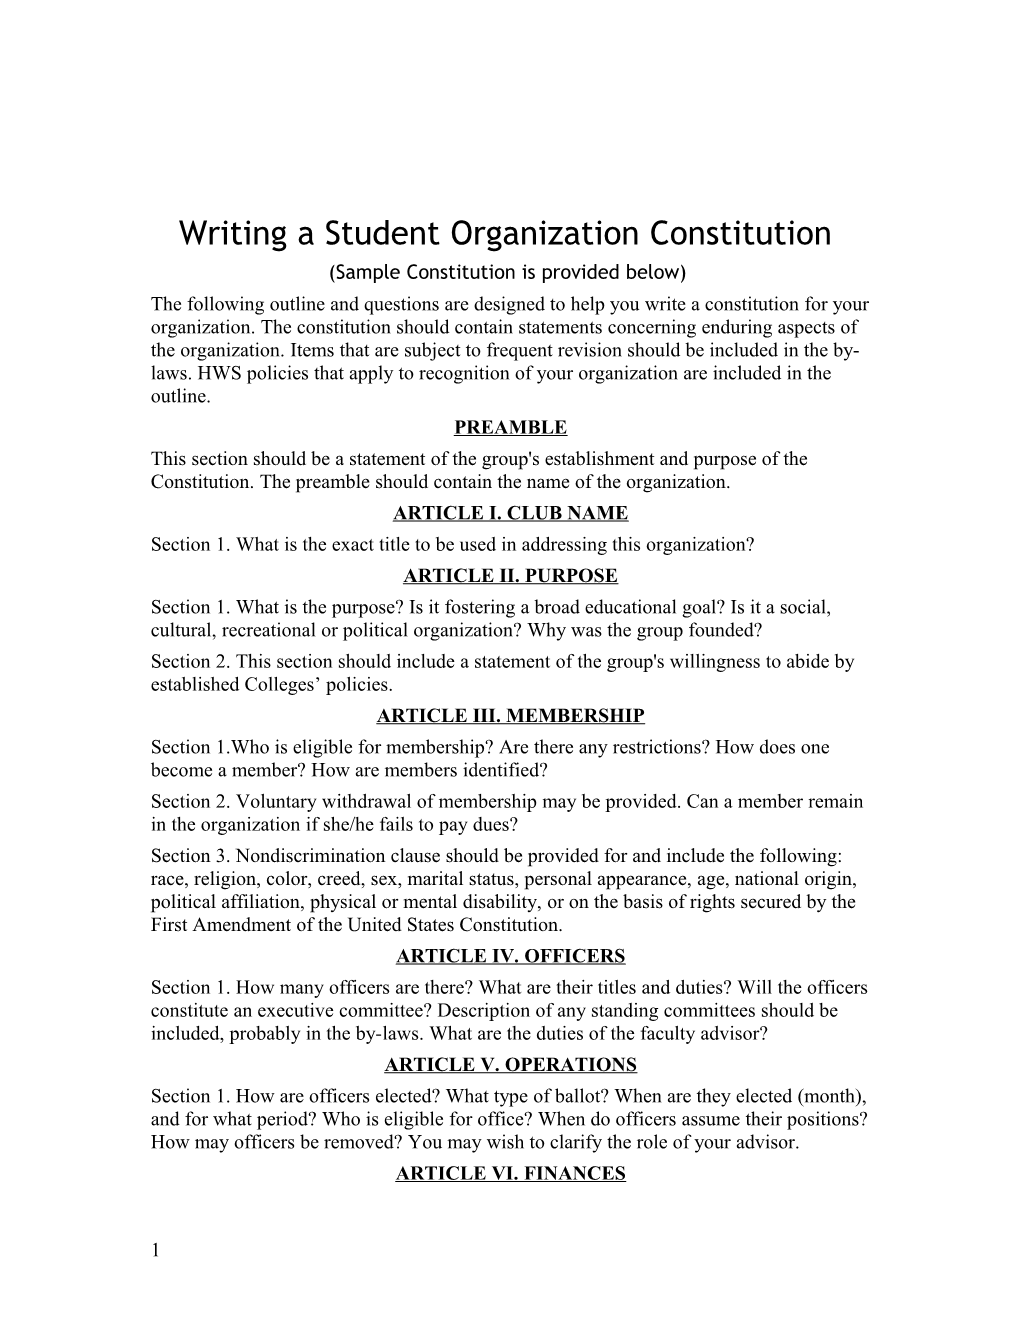 Writing a Student Organization Constitution (Includes a Sample Constitution)